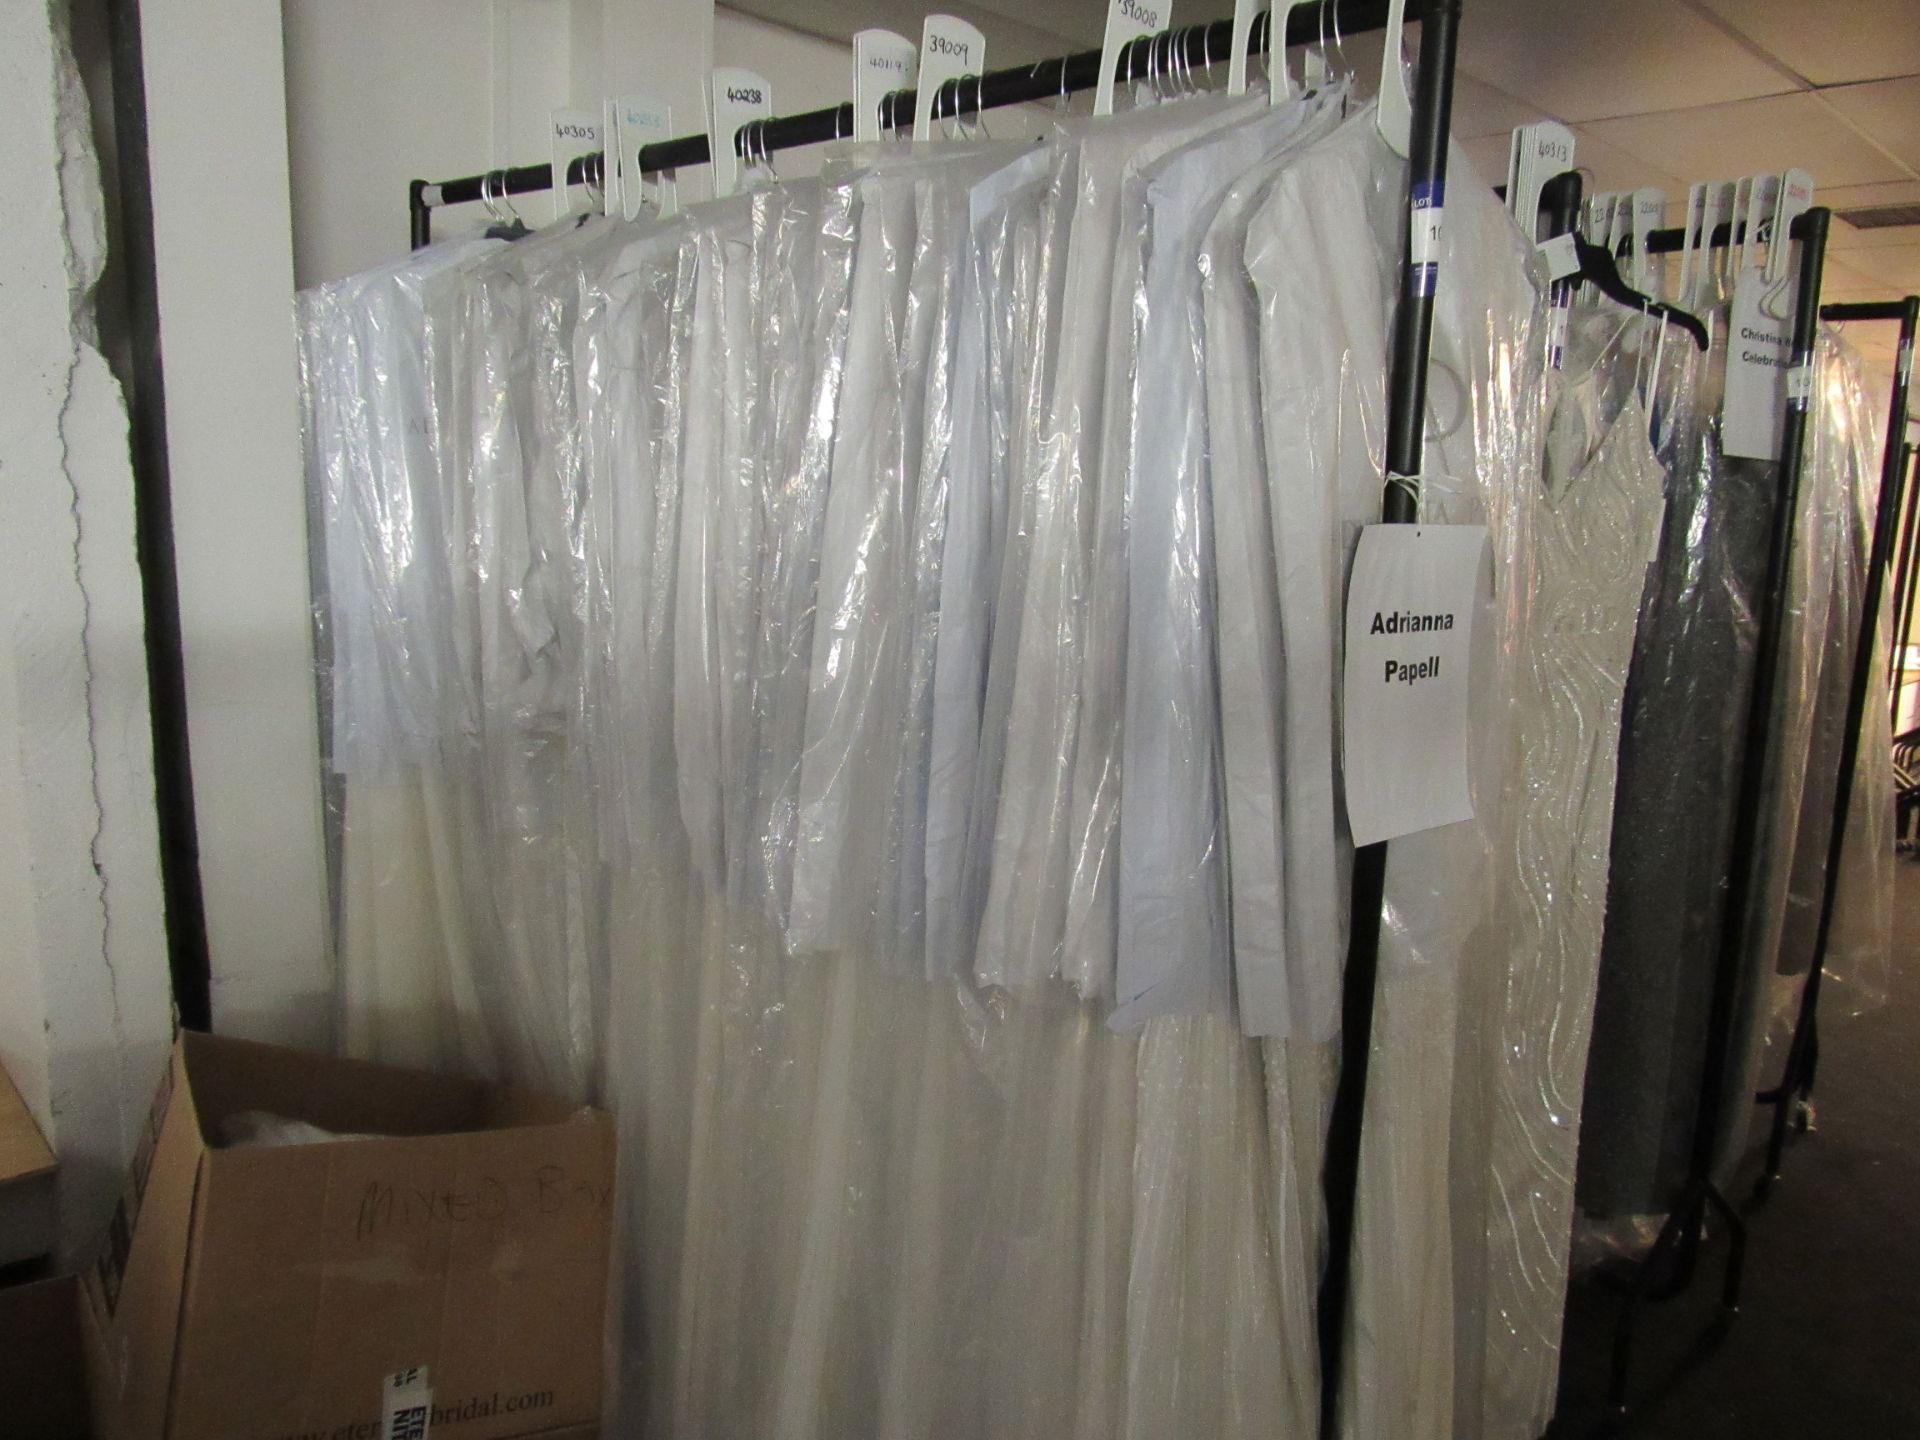 33 Adrianna Papell Bridal gowns to rail